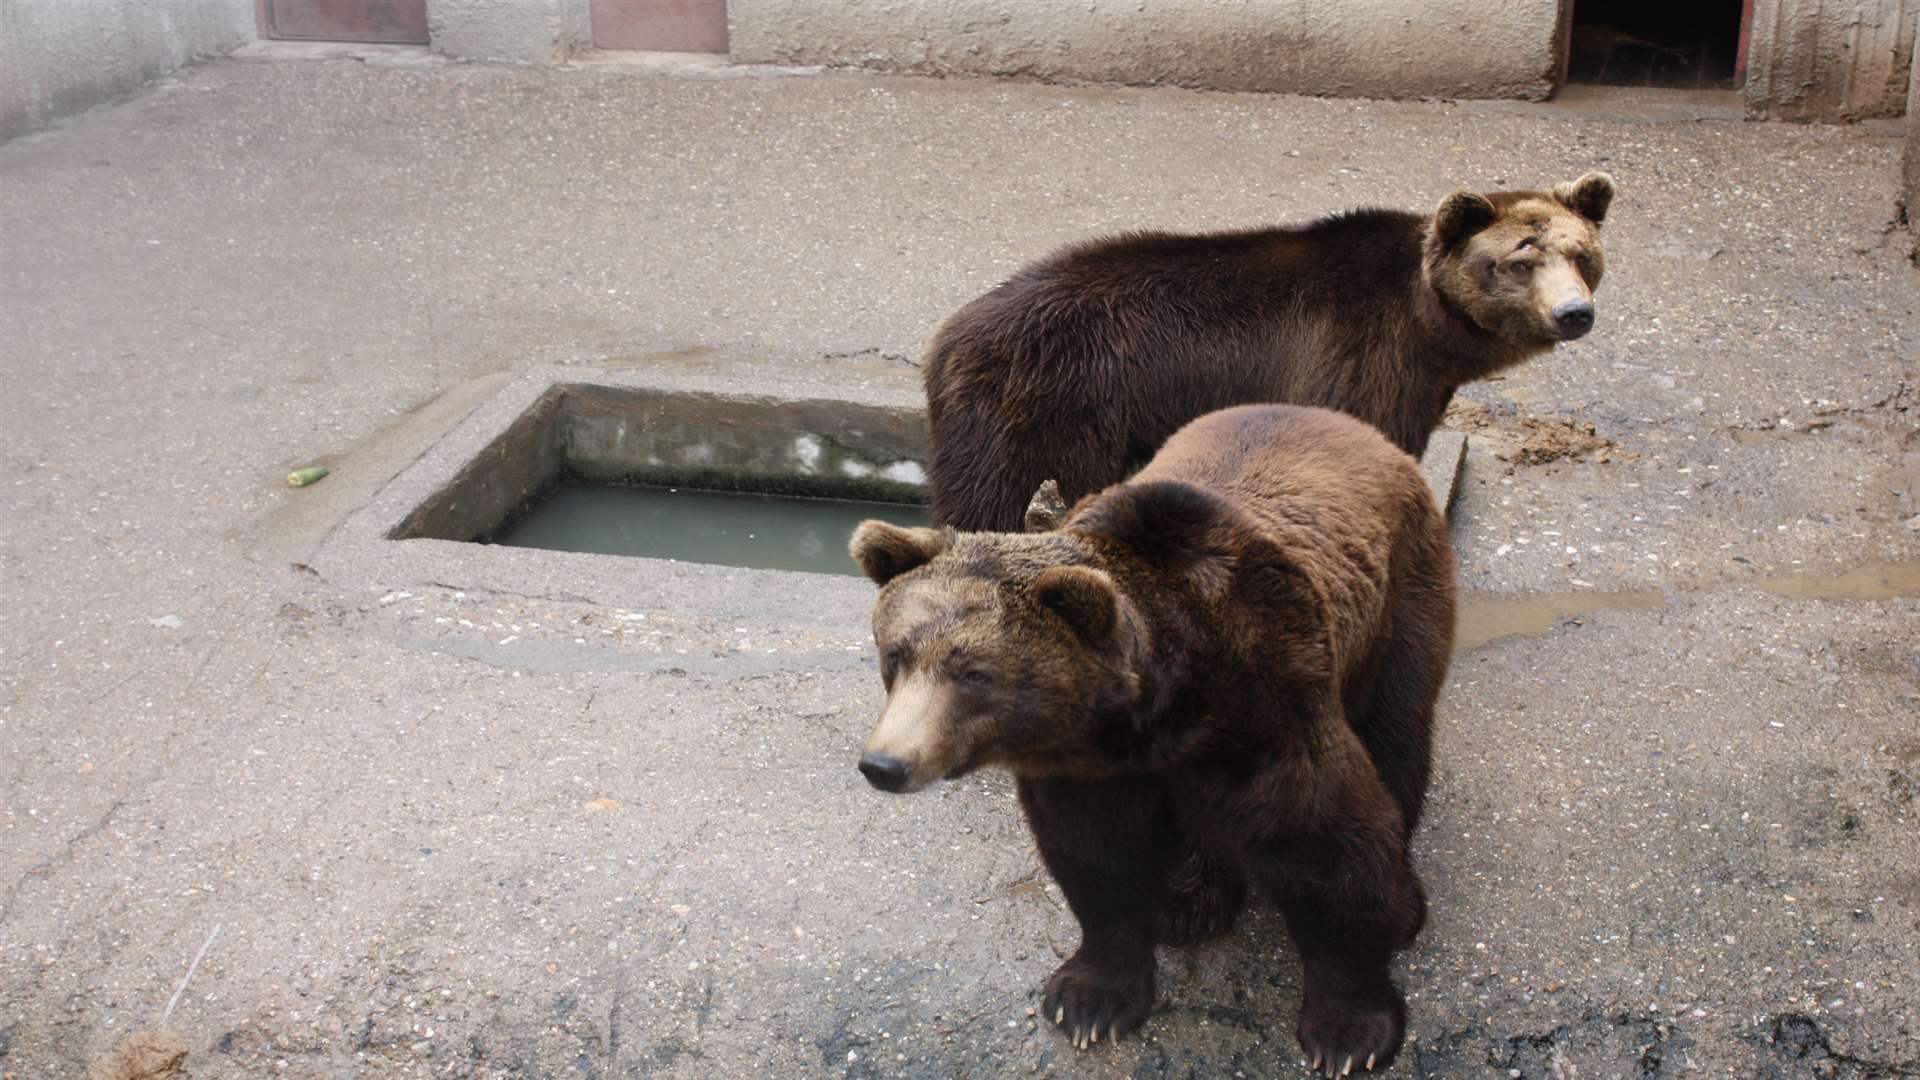 The suffering bears are in a concrete pit in Bulgaria